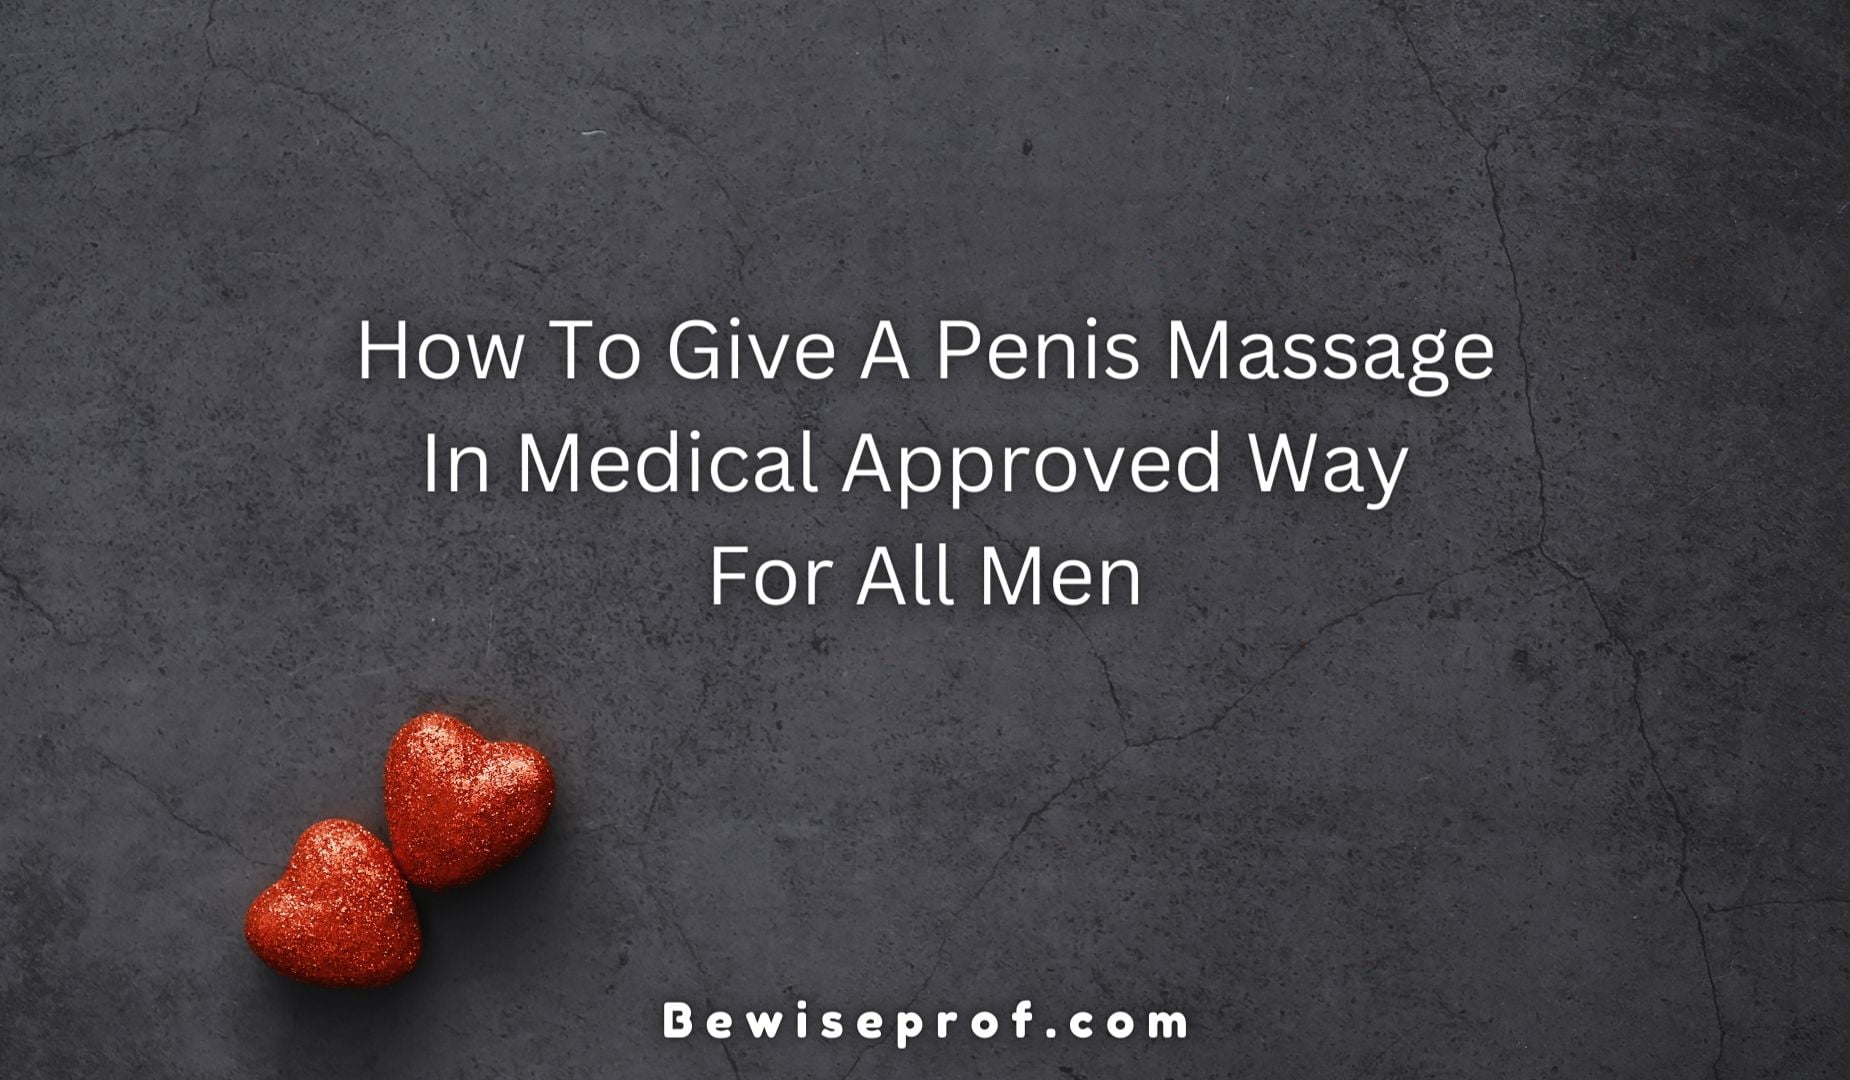 How To Give A Penis Massage